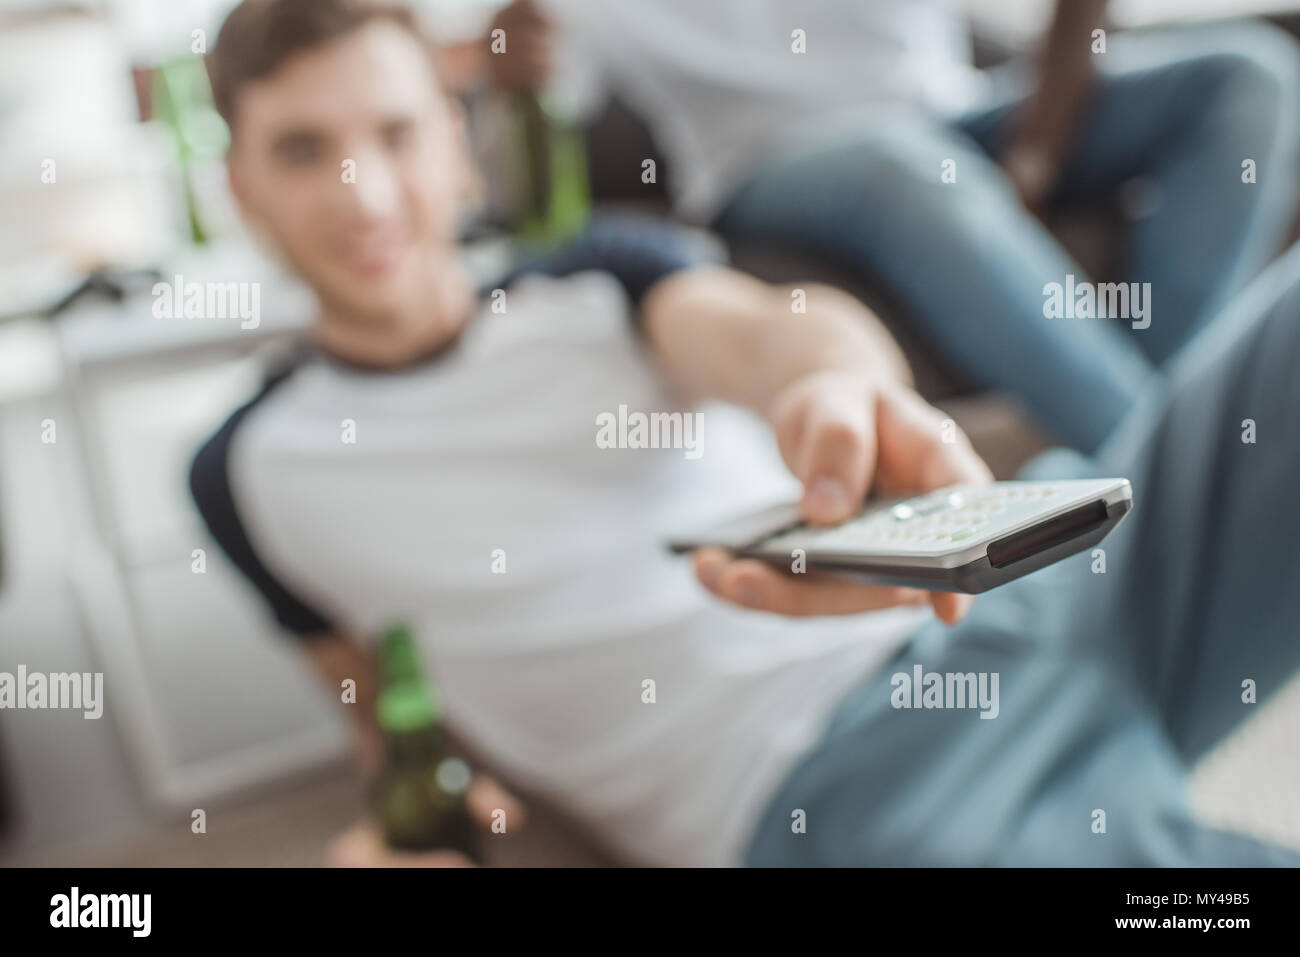 closeup shot of remote in hand of man sitting with bottle of beer Stock Photo